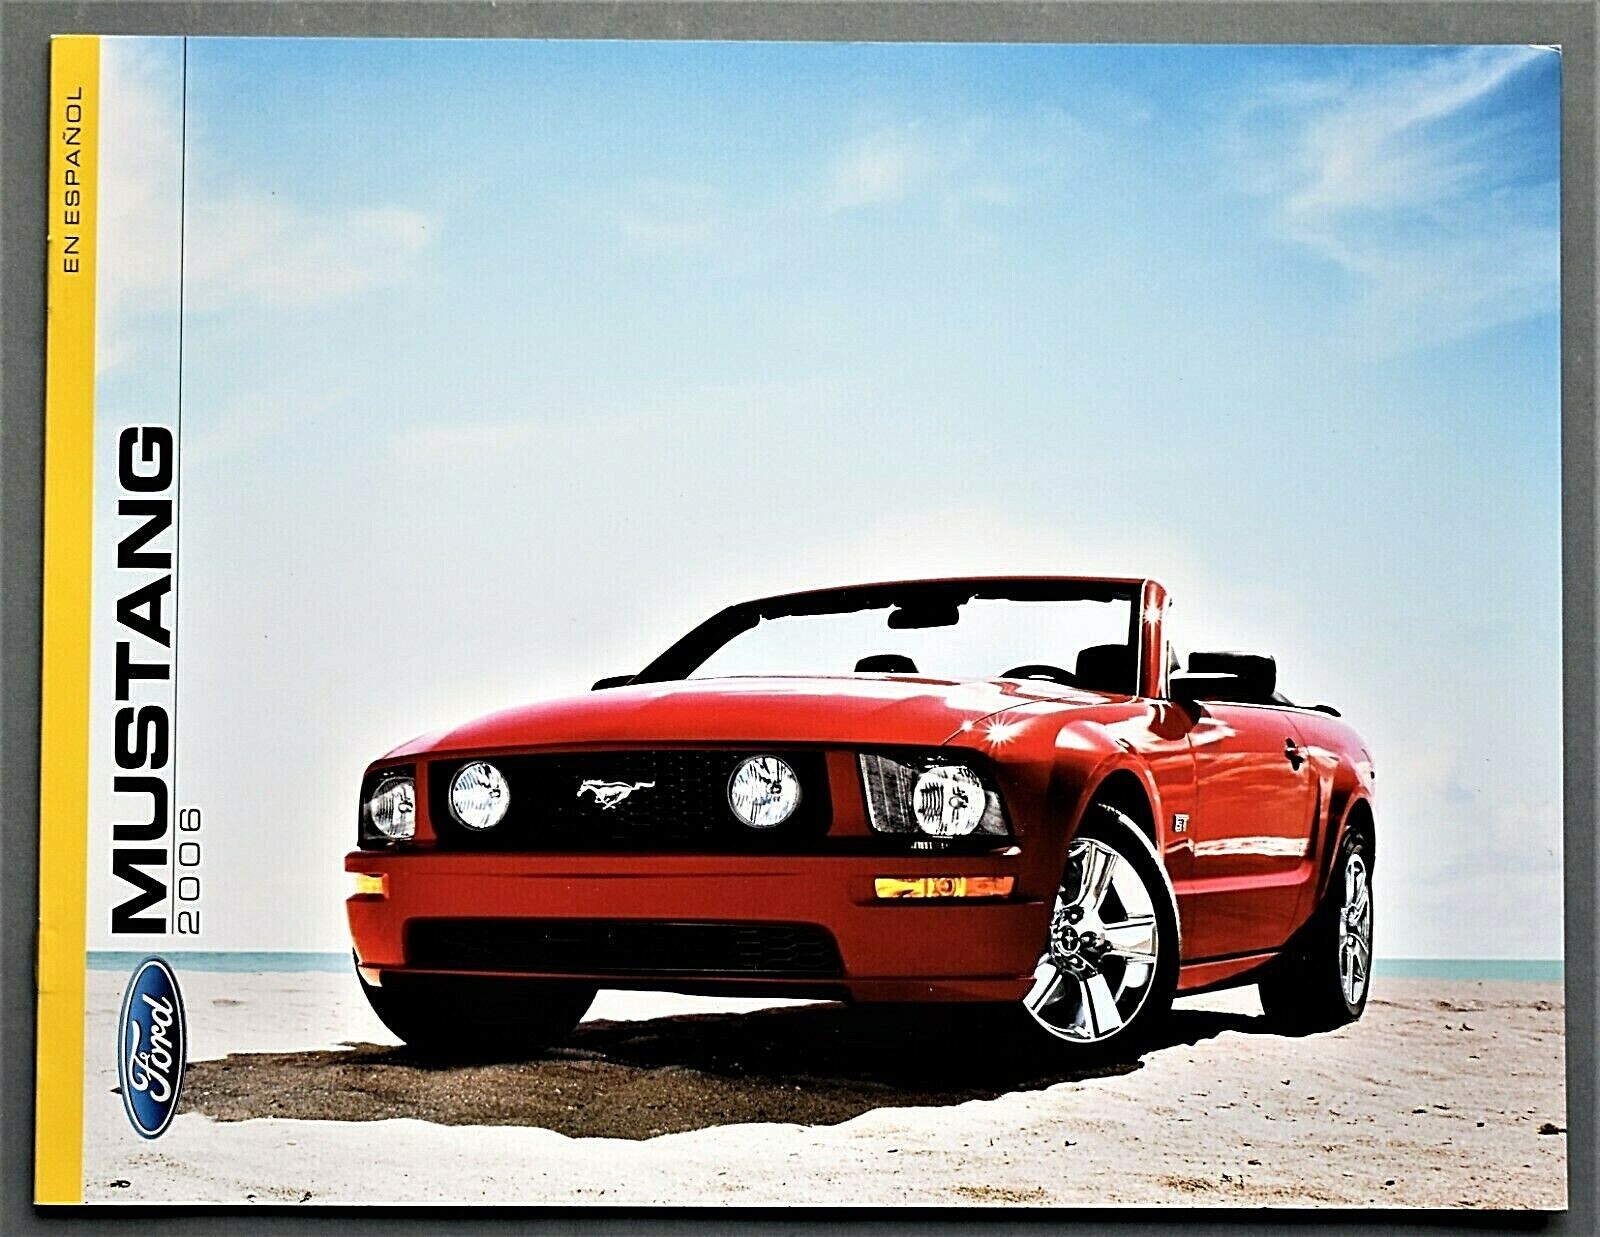 2006 FORD MUSTANG SPANISH LANGUAGE BROCHURE CATALOG ~ 8 PAGES